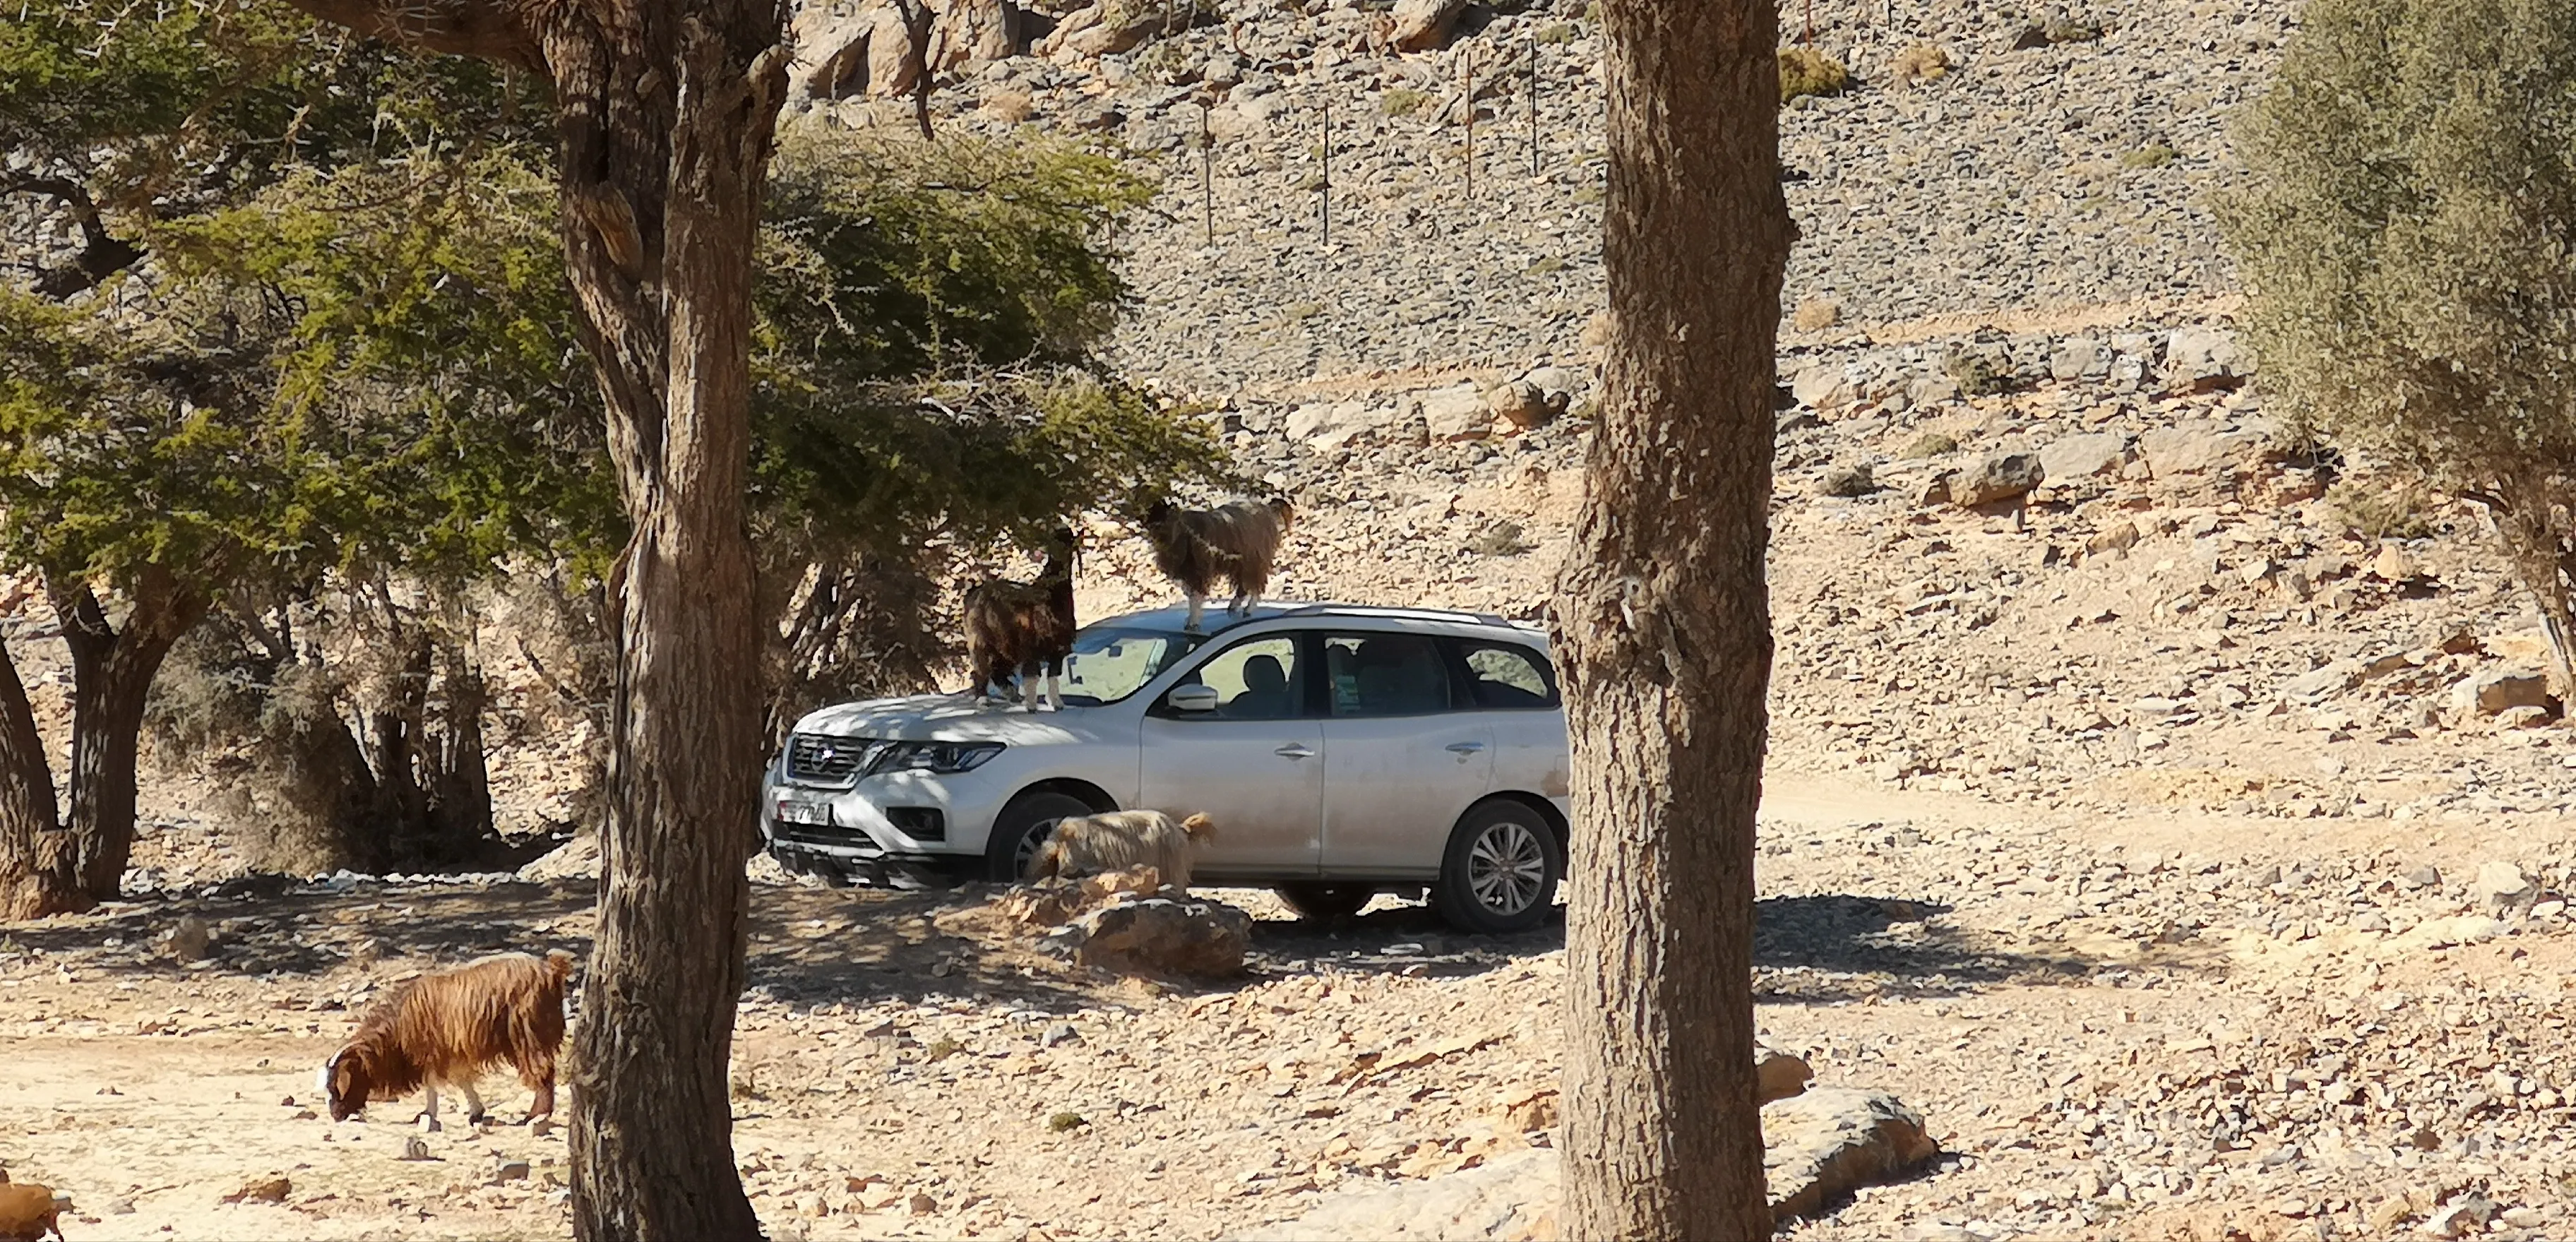 Rental cars are the best way to get around, but do not park under trees or you will find it to be the playground of goats